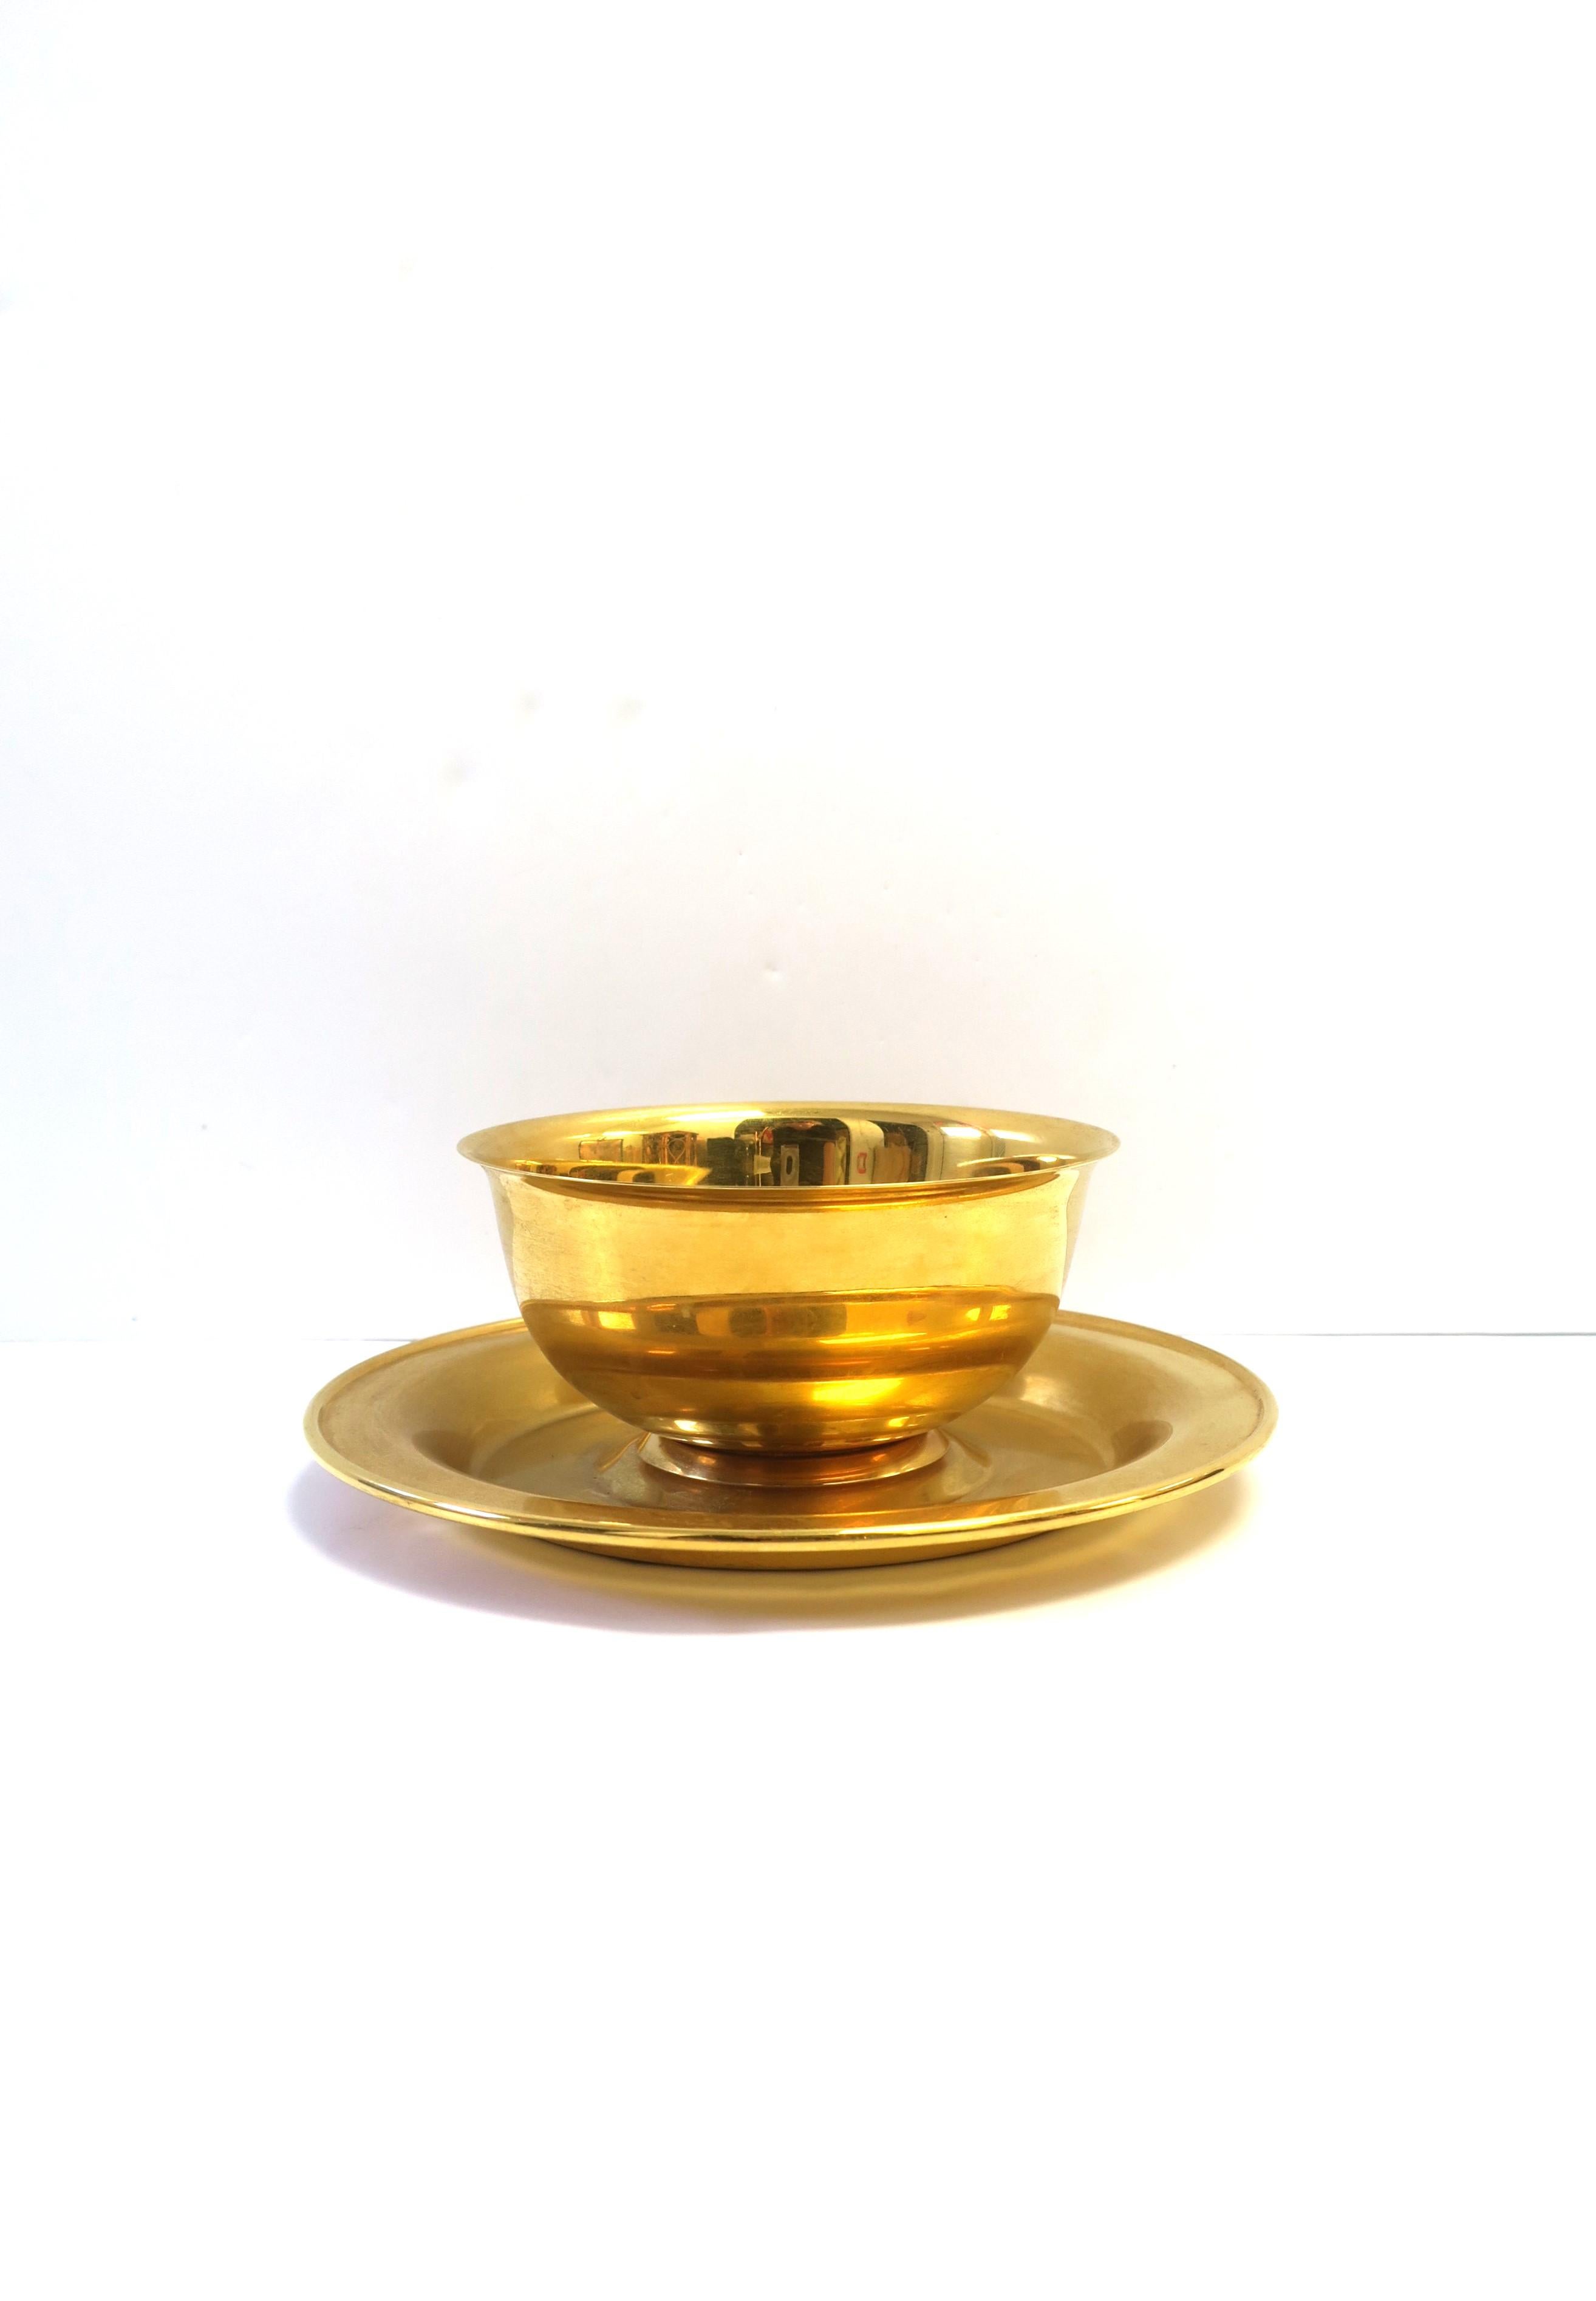 A gold-plated Revere style bowl with attached underplate saucer, circa mid to late-20th century. Piece can make a great serving bowl for nuts, dip, gravy, etc., with underplate saucer to hold utensil. Bowl diameter: 4.94